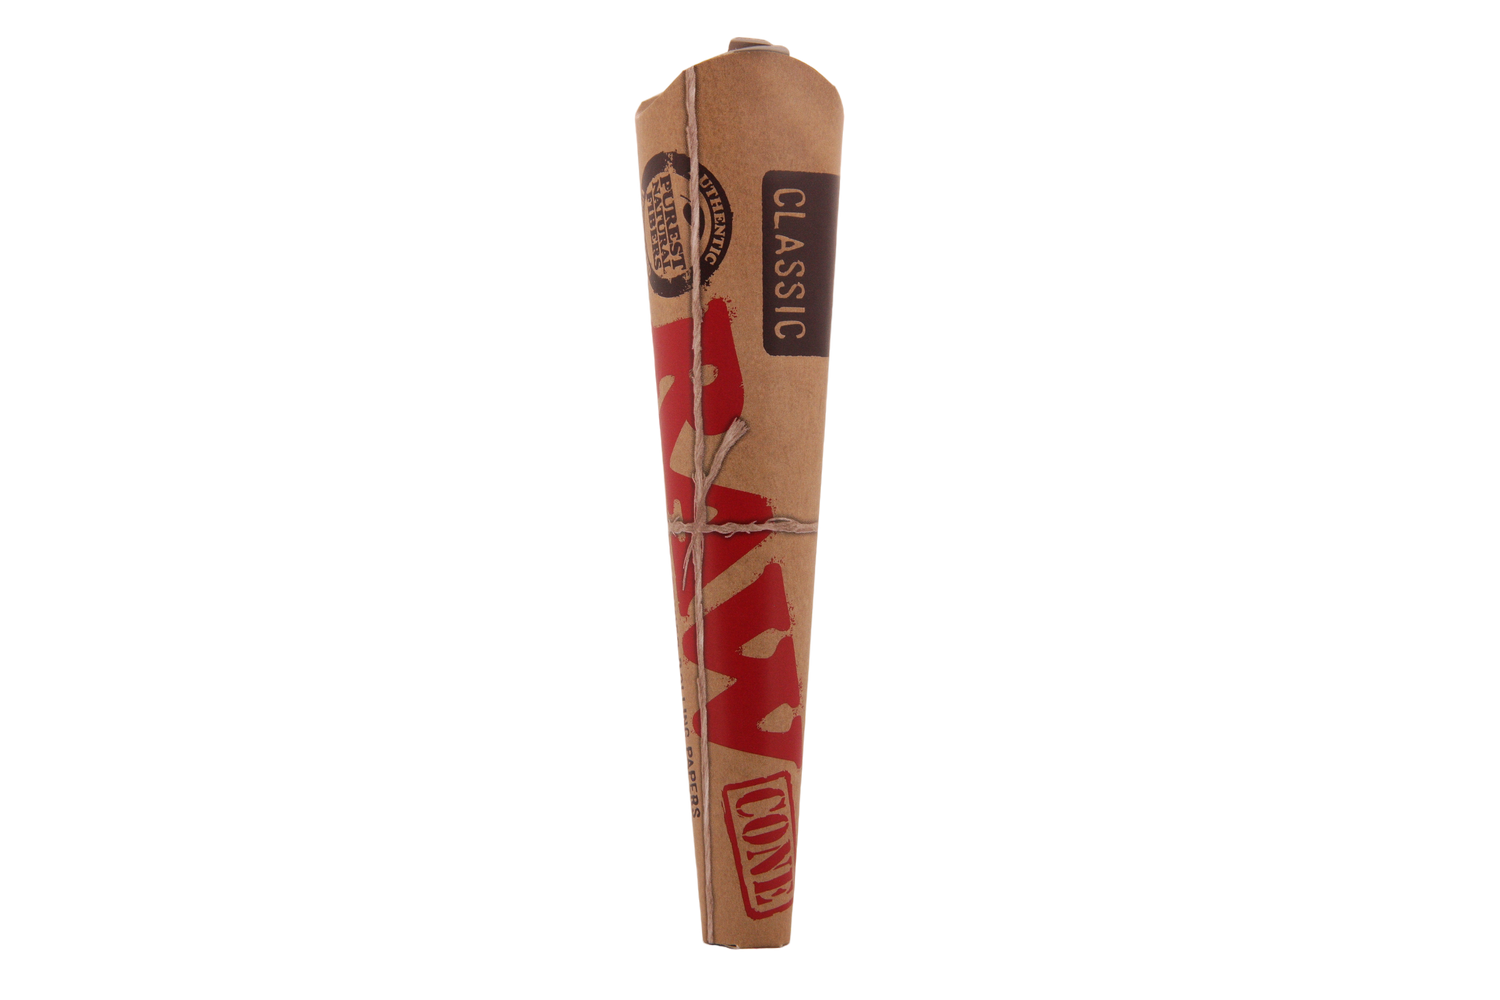 Raw Classic Cones - King Size 3pk